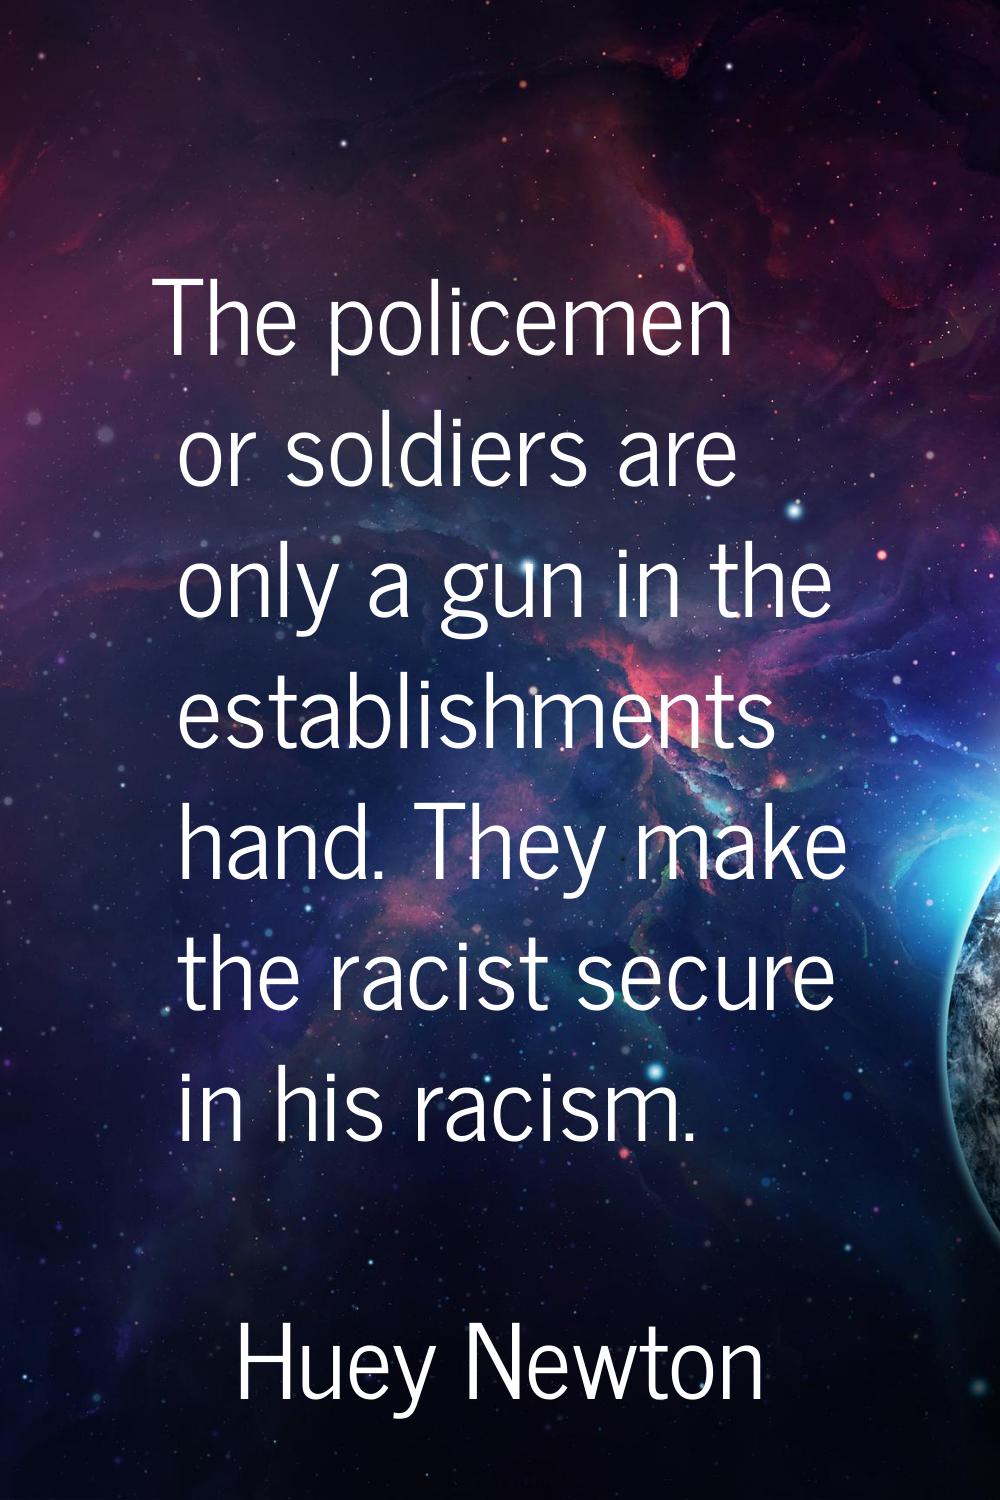 The policemen or soldiers are only a gun in the establishments hand. They make the racist secure in